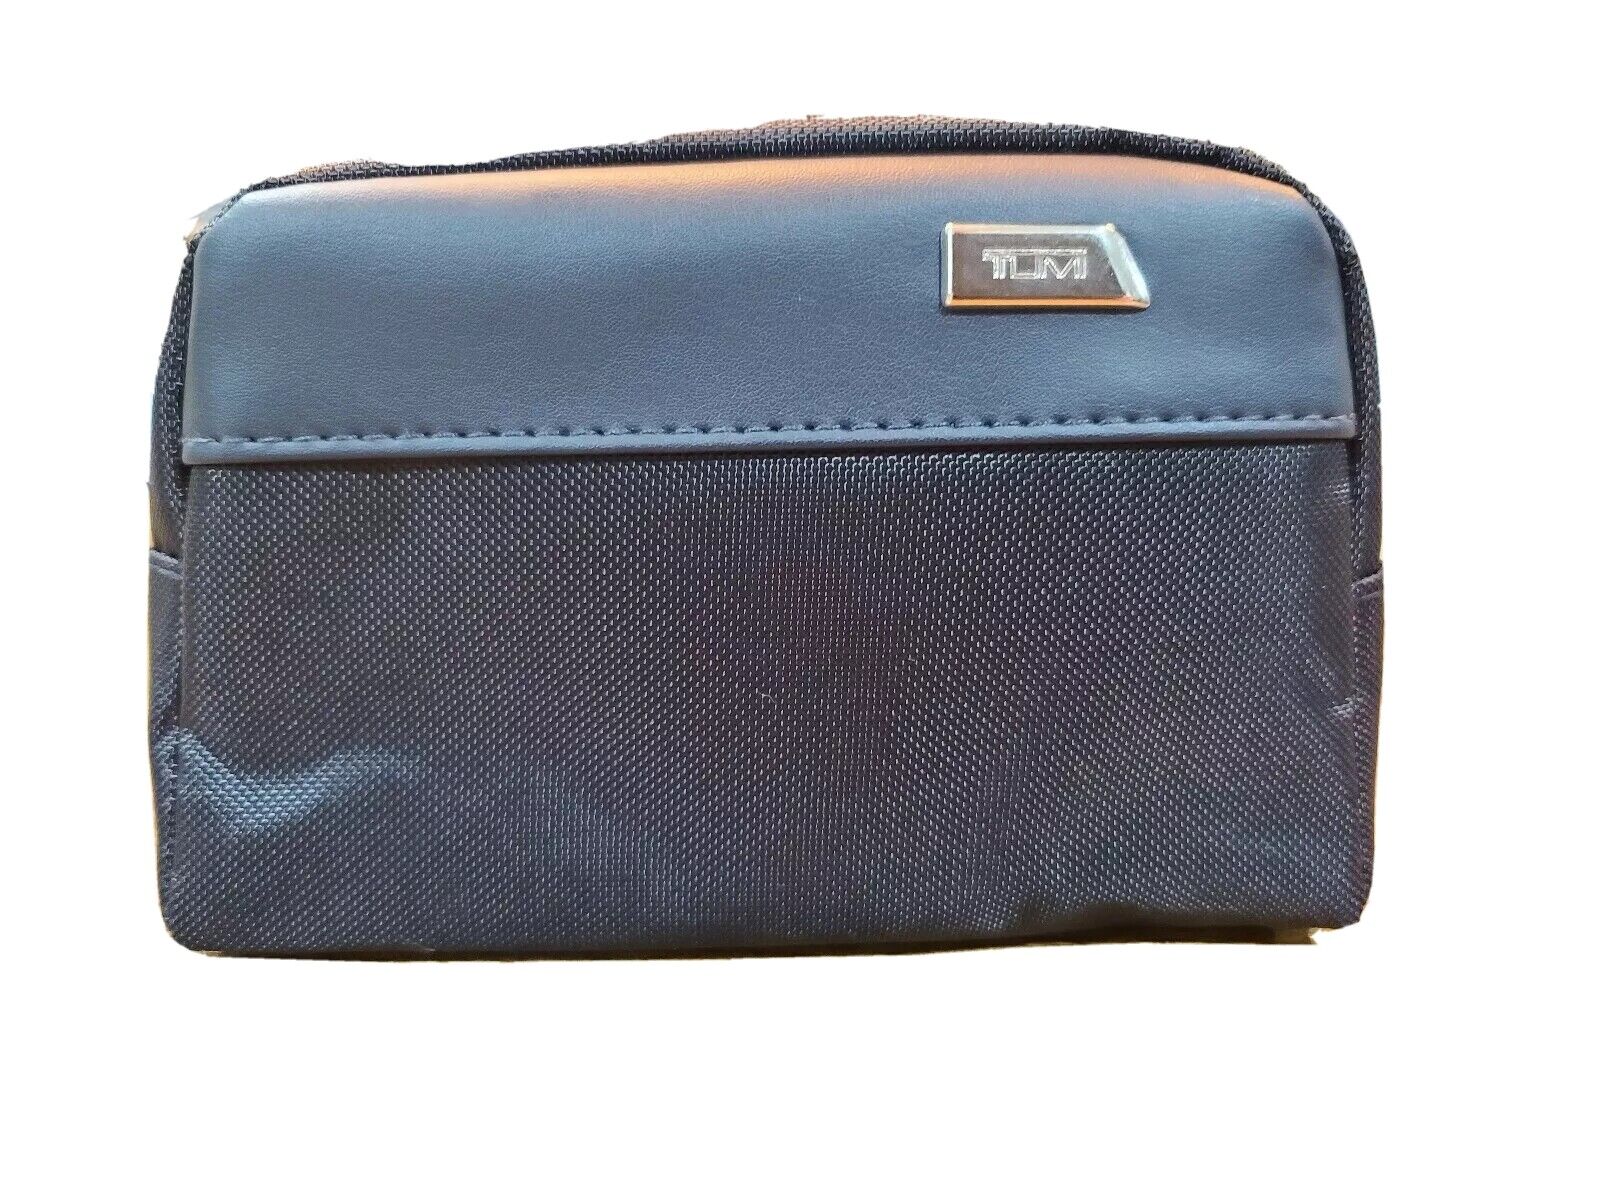 TUMI for Delta One First Class - NEW Toiletry Bag Blue Nylon w/Faux Leather